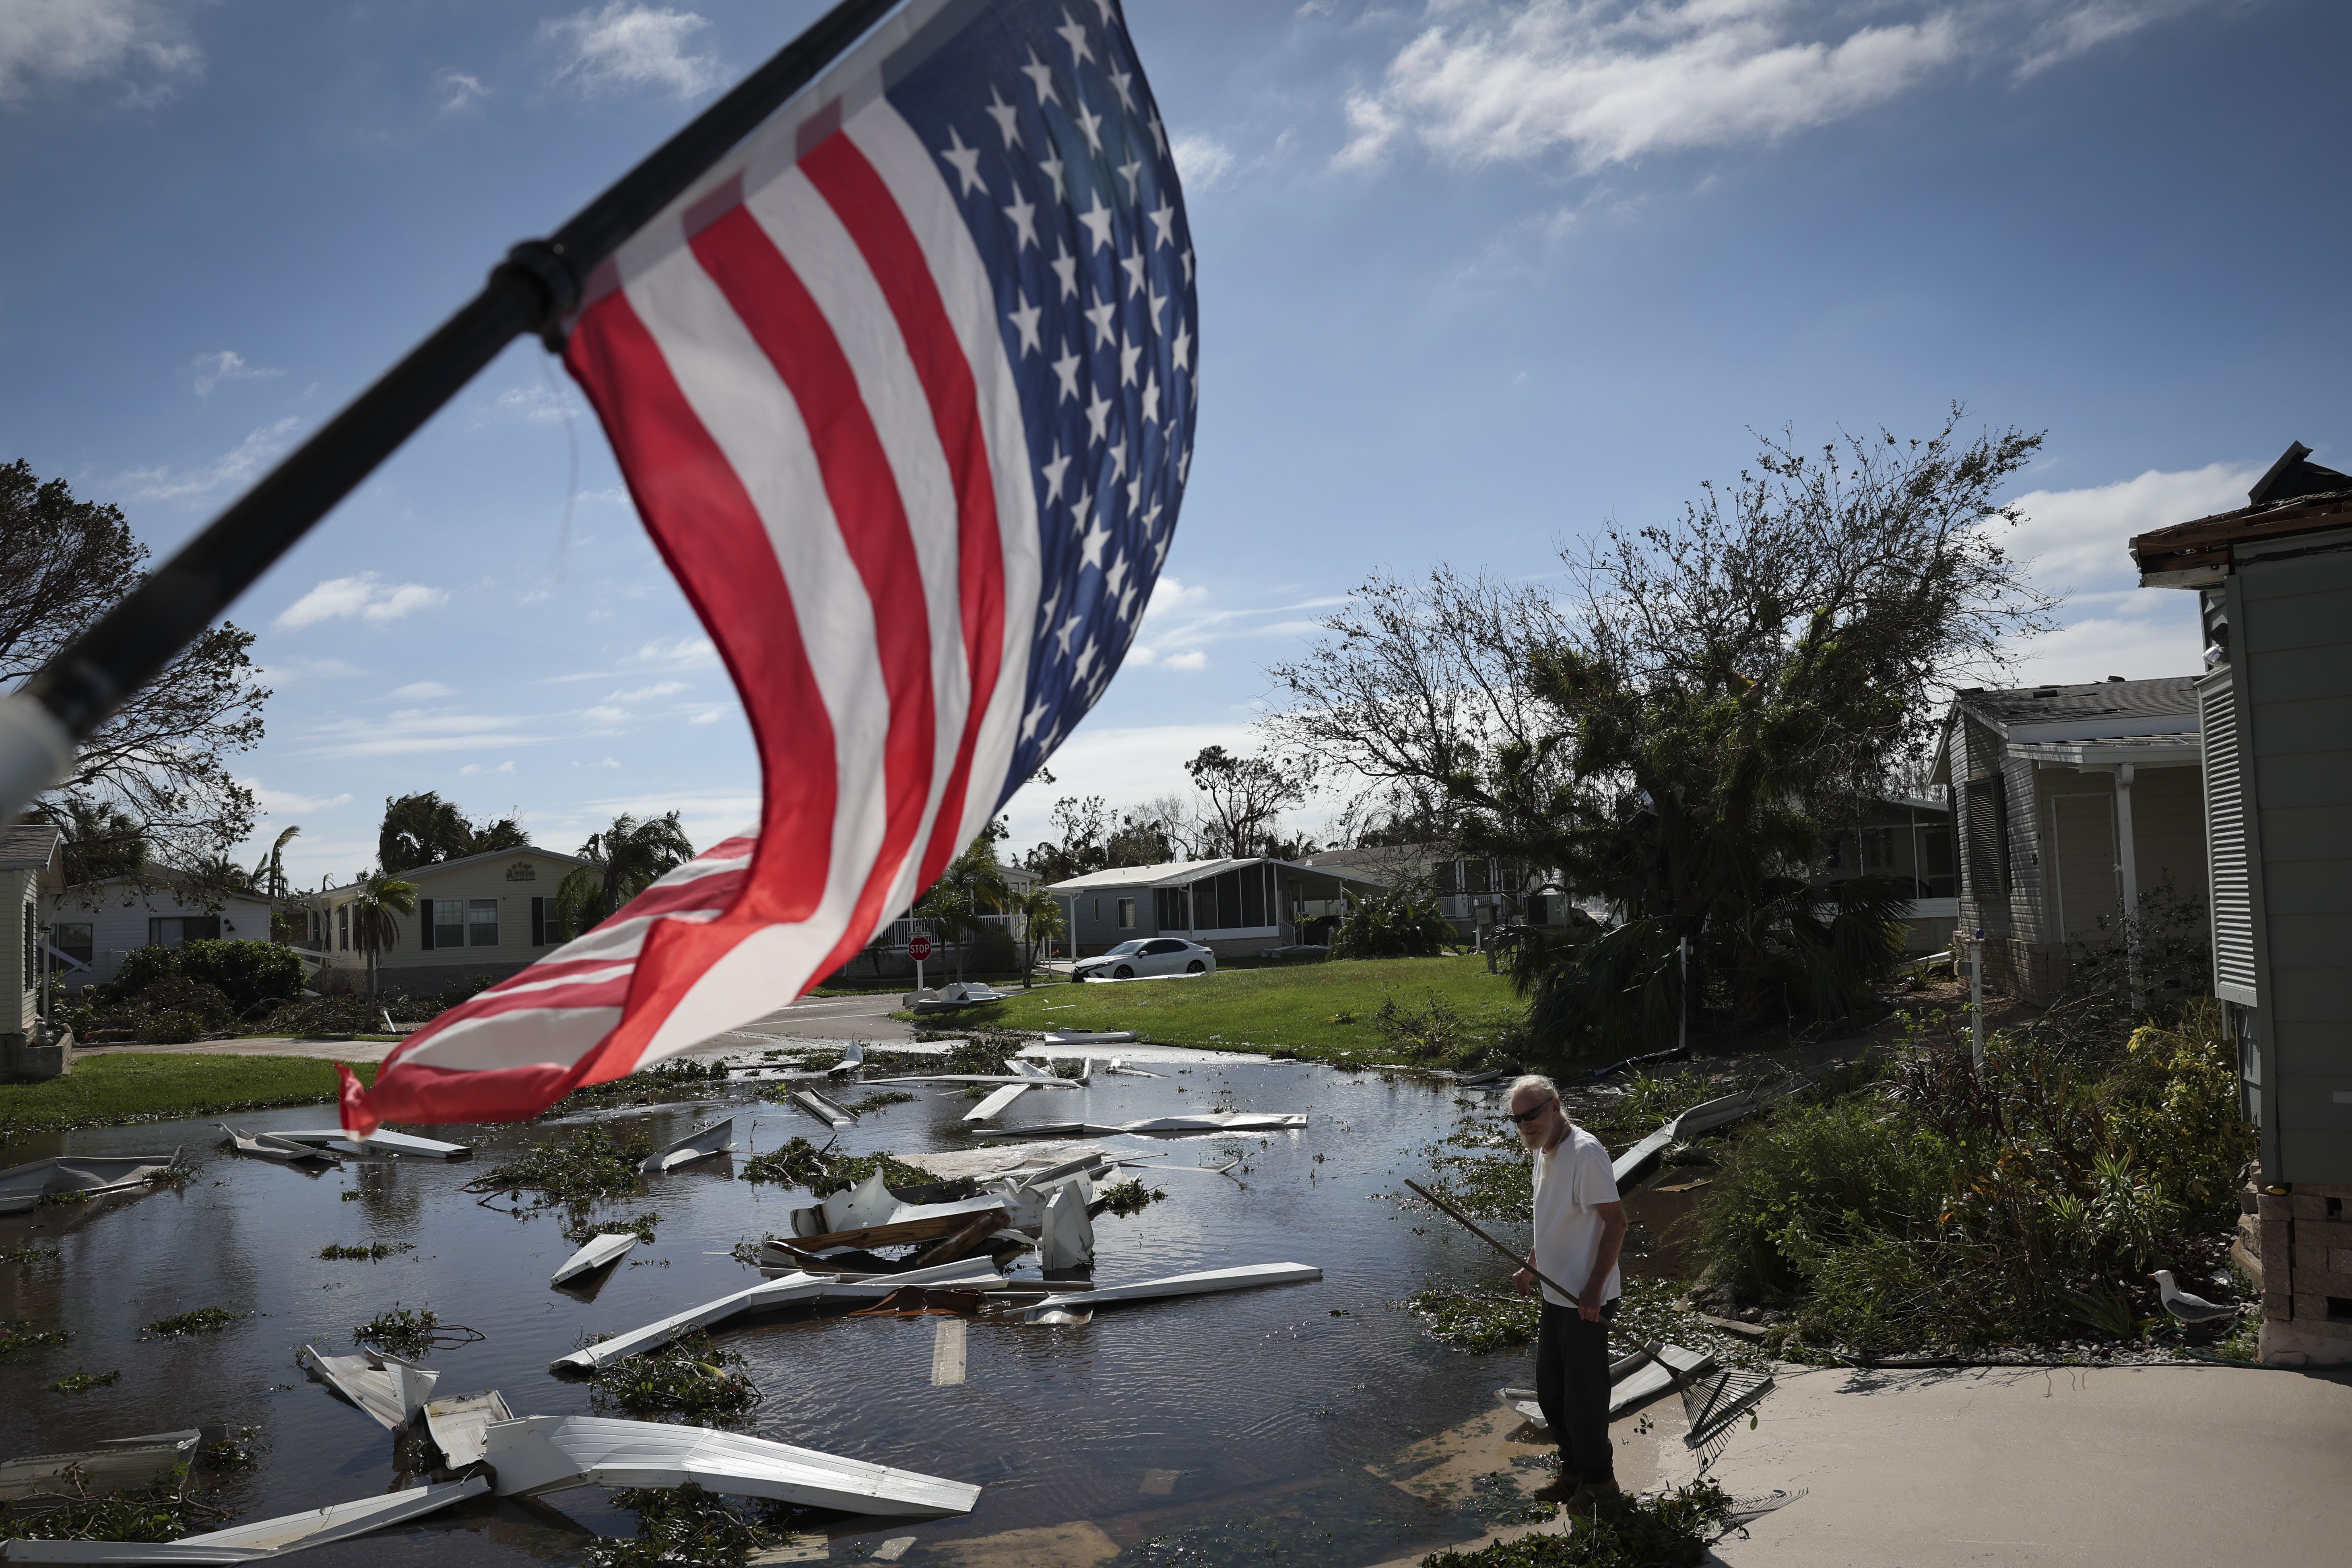 man cleans up debris after a hurricane next to an American flag